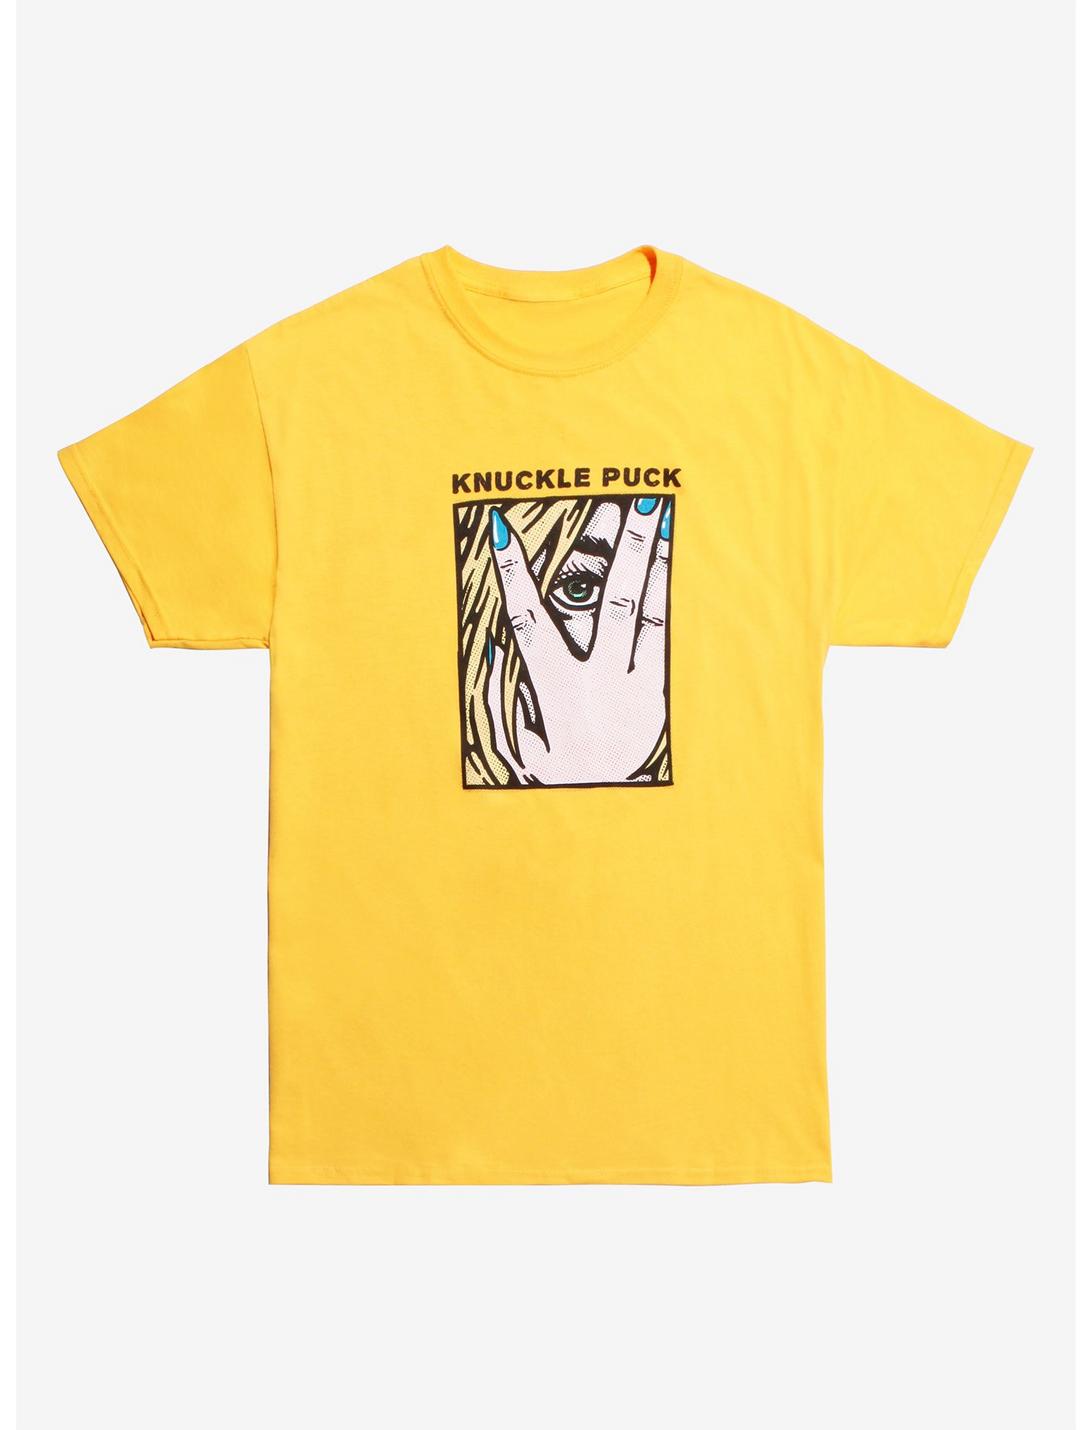 Knuckle Puck Hand Face Graphic T-Shirt, YELLOW, hi-res